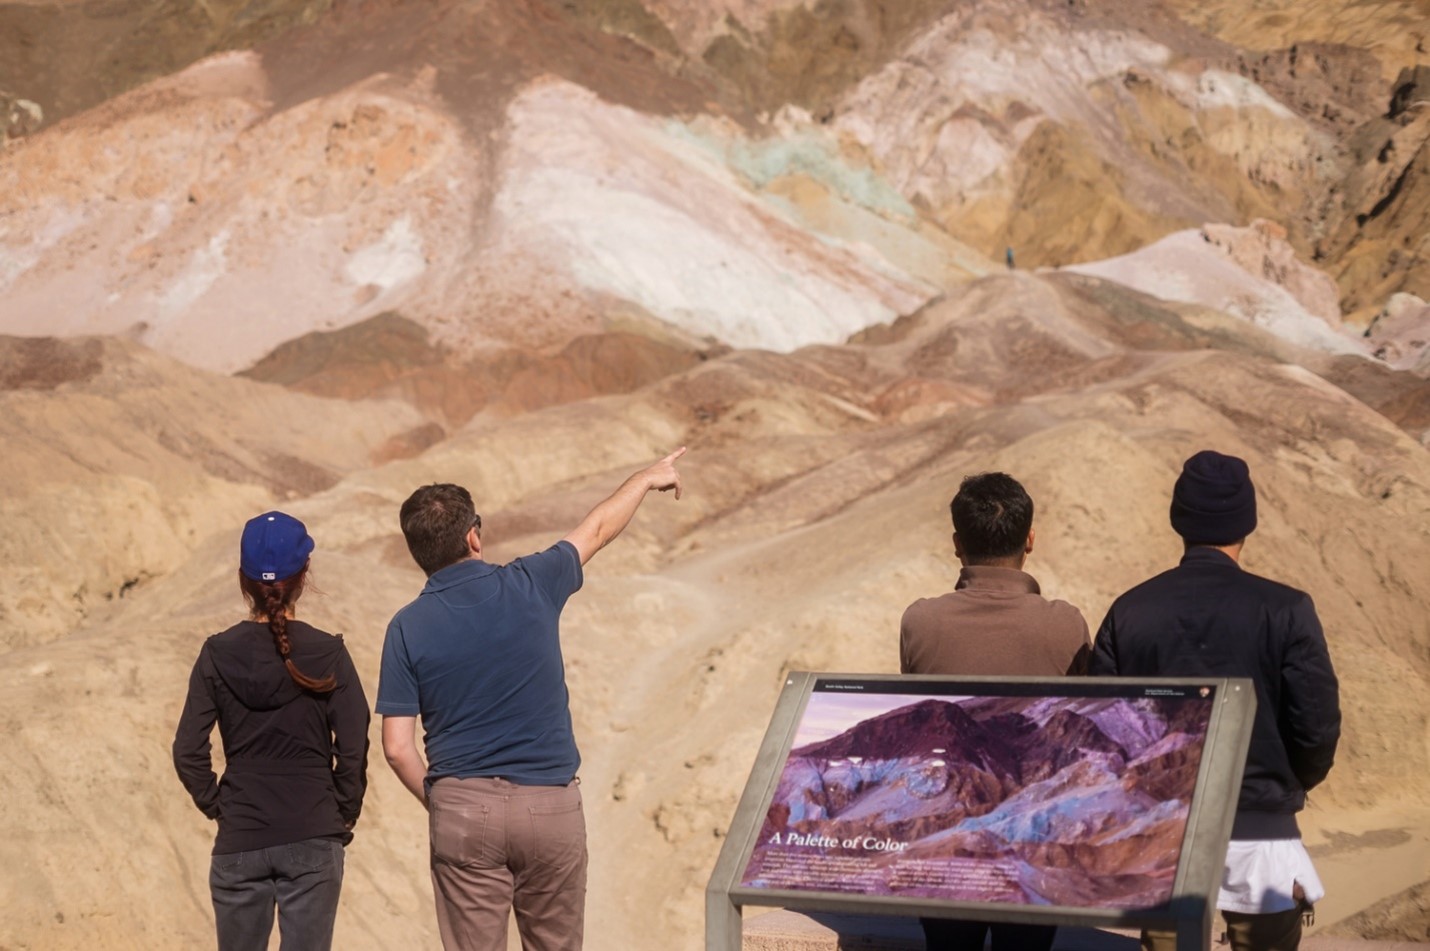 people viewing colorful hills, with an informational sign